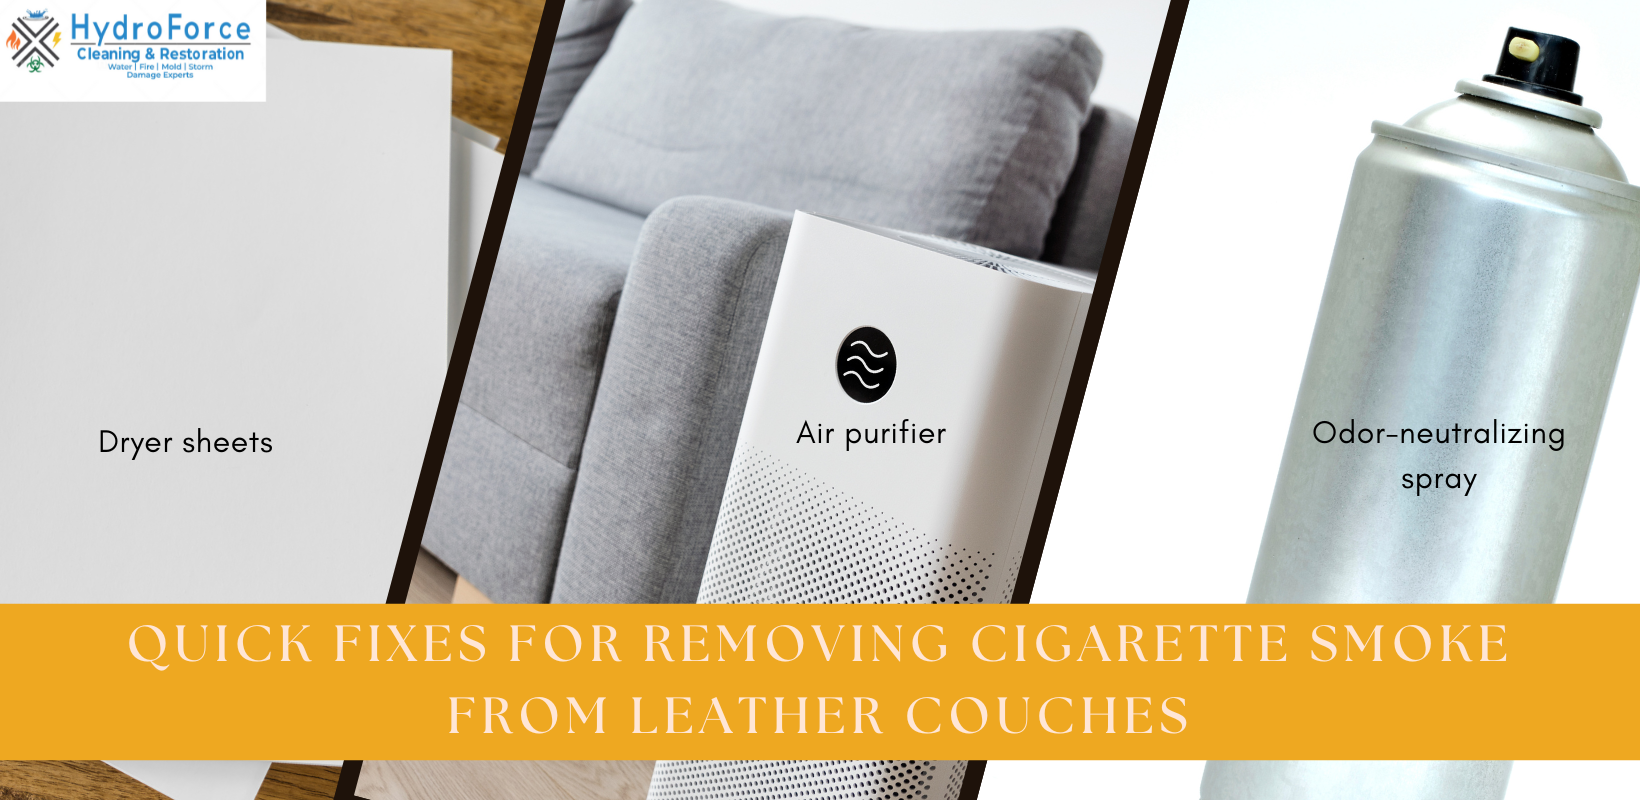 Quick fixes for removing cigarette smoke from leather couches